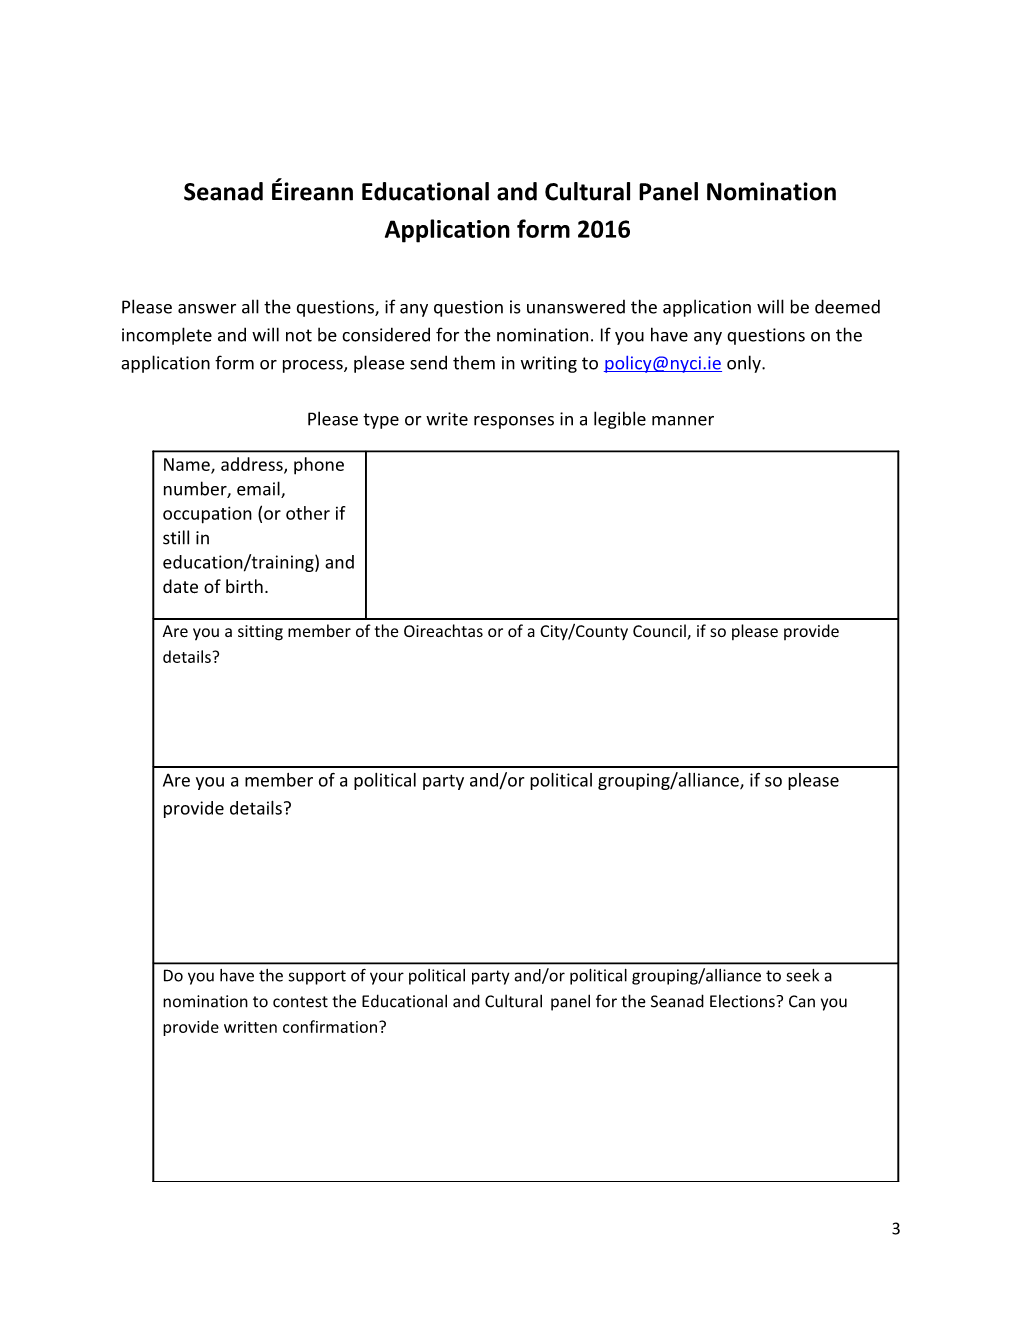 Nomination to the Cultural and Educational Panel of Seanad Éireann